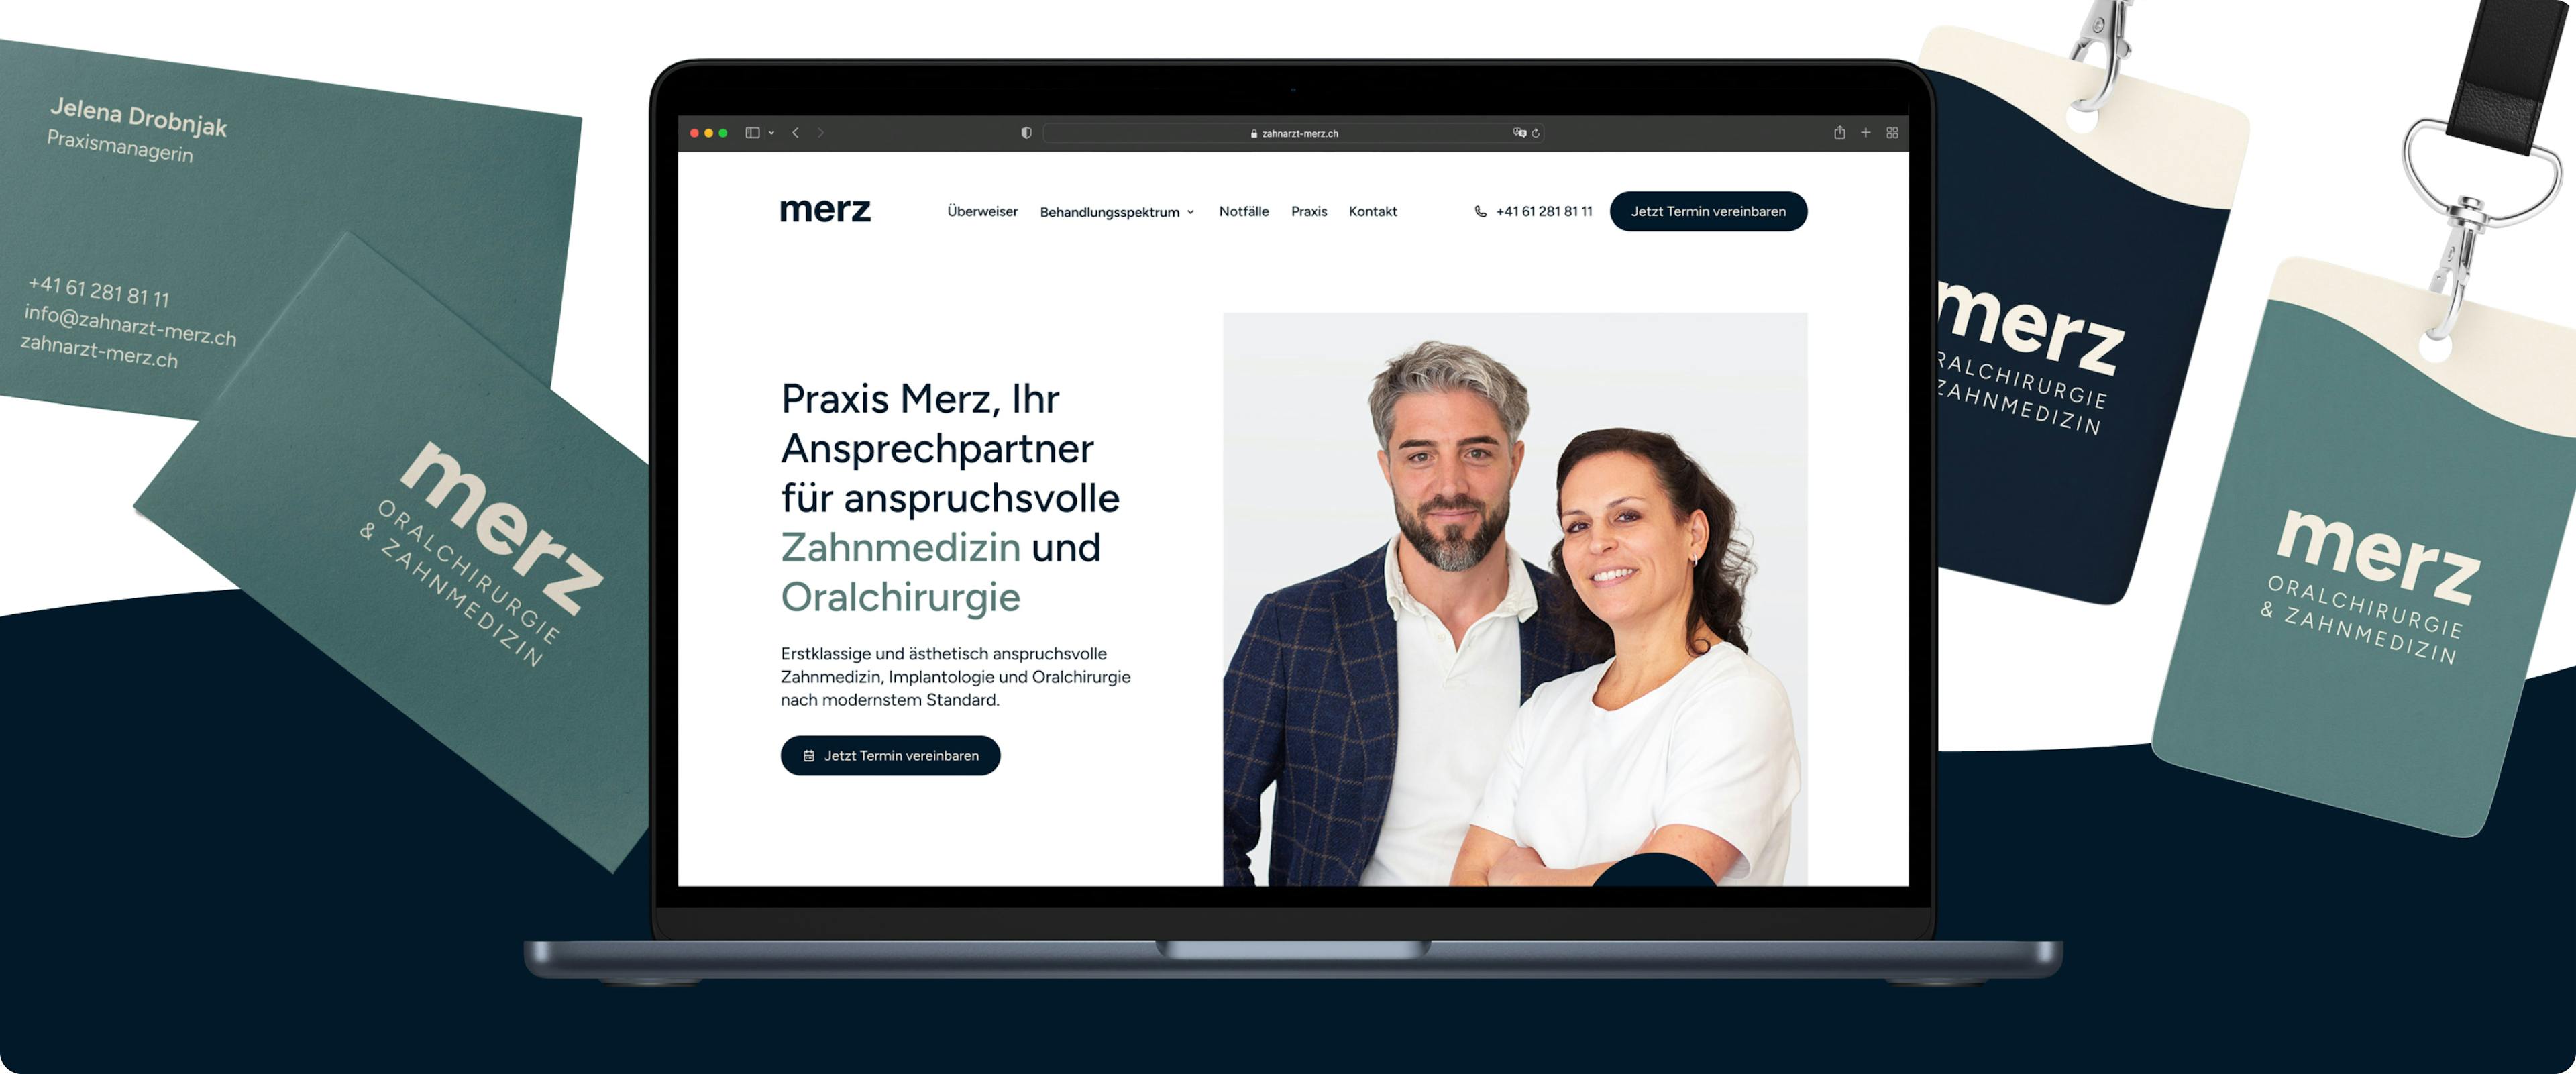 Business cards, badges and website from Merz Dental Practice